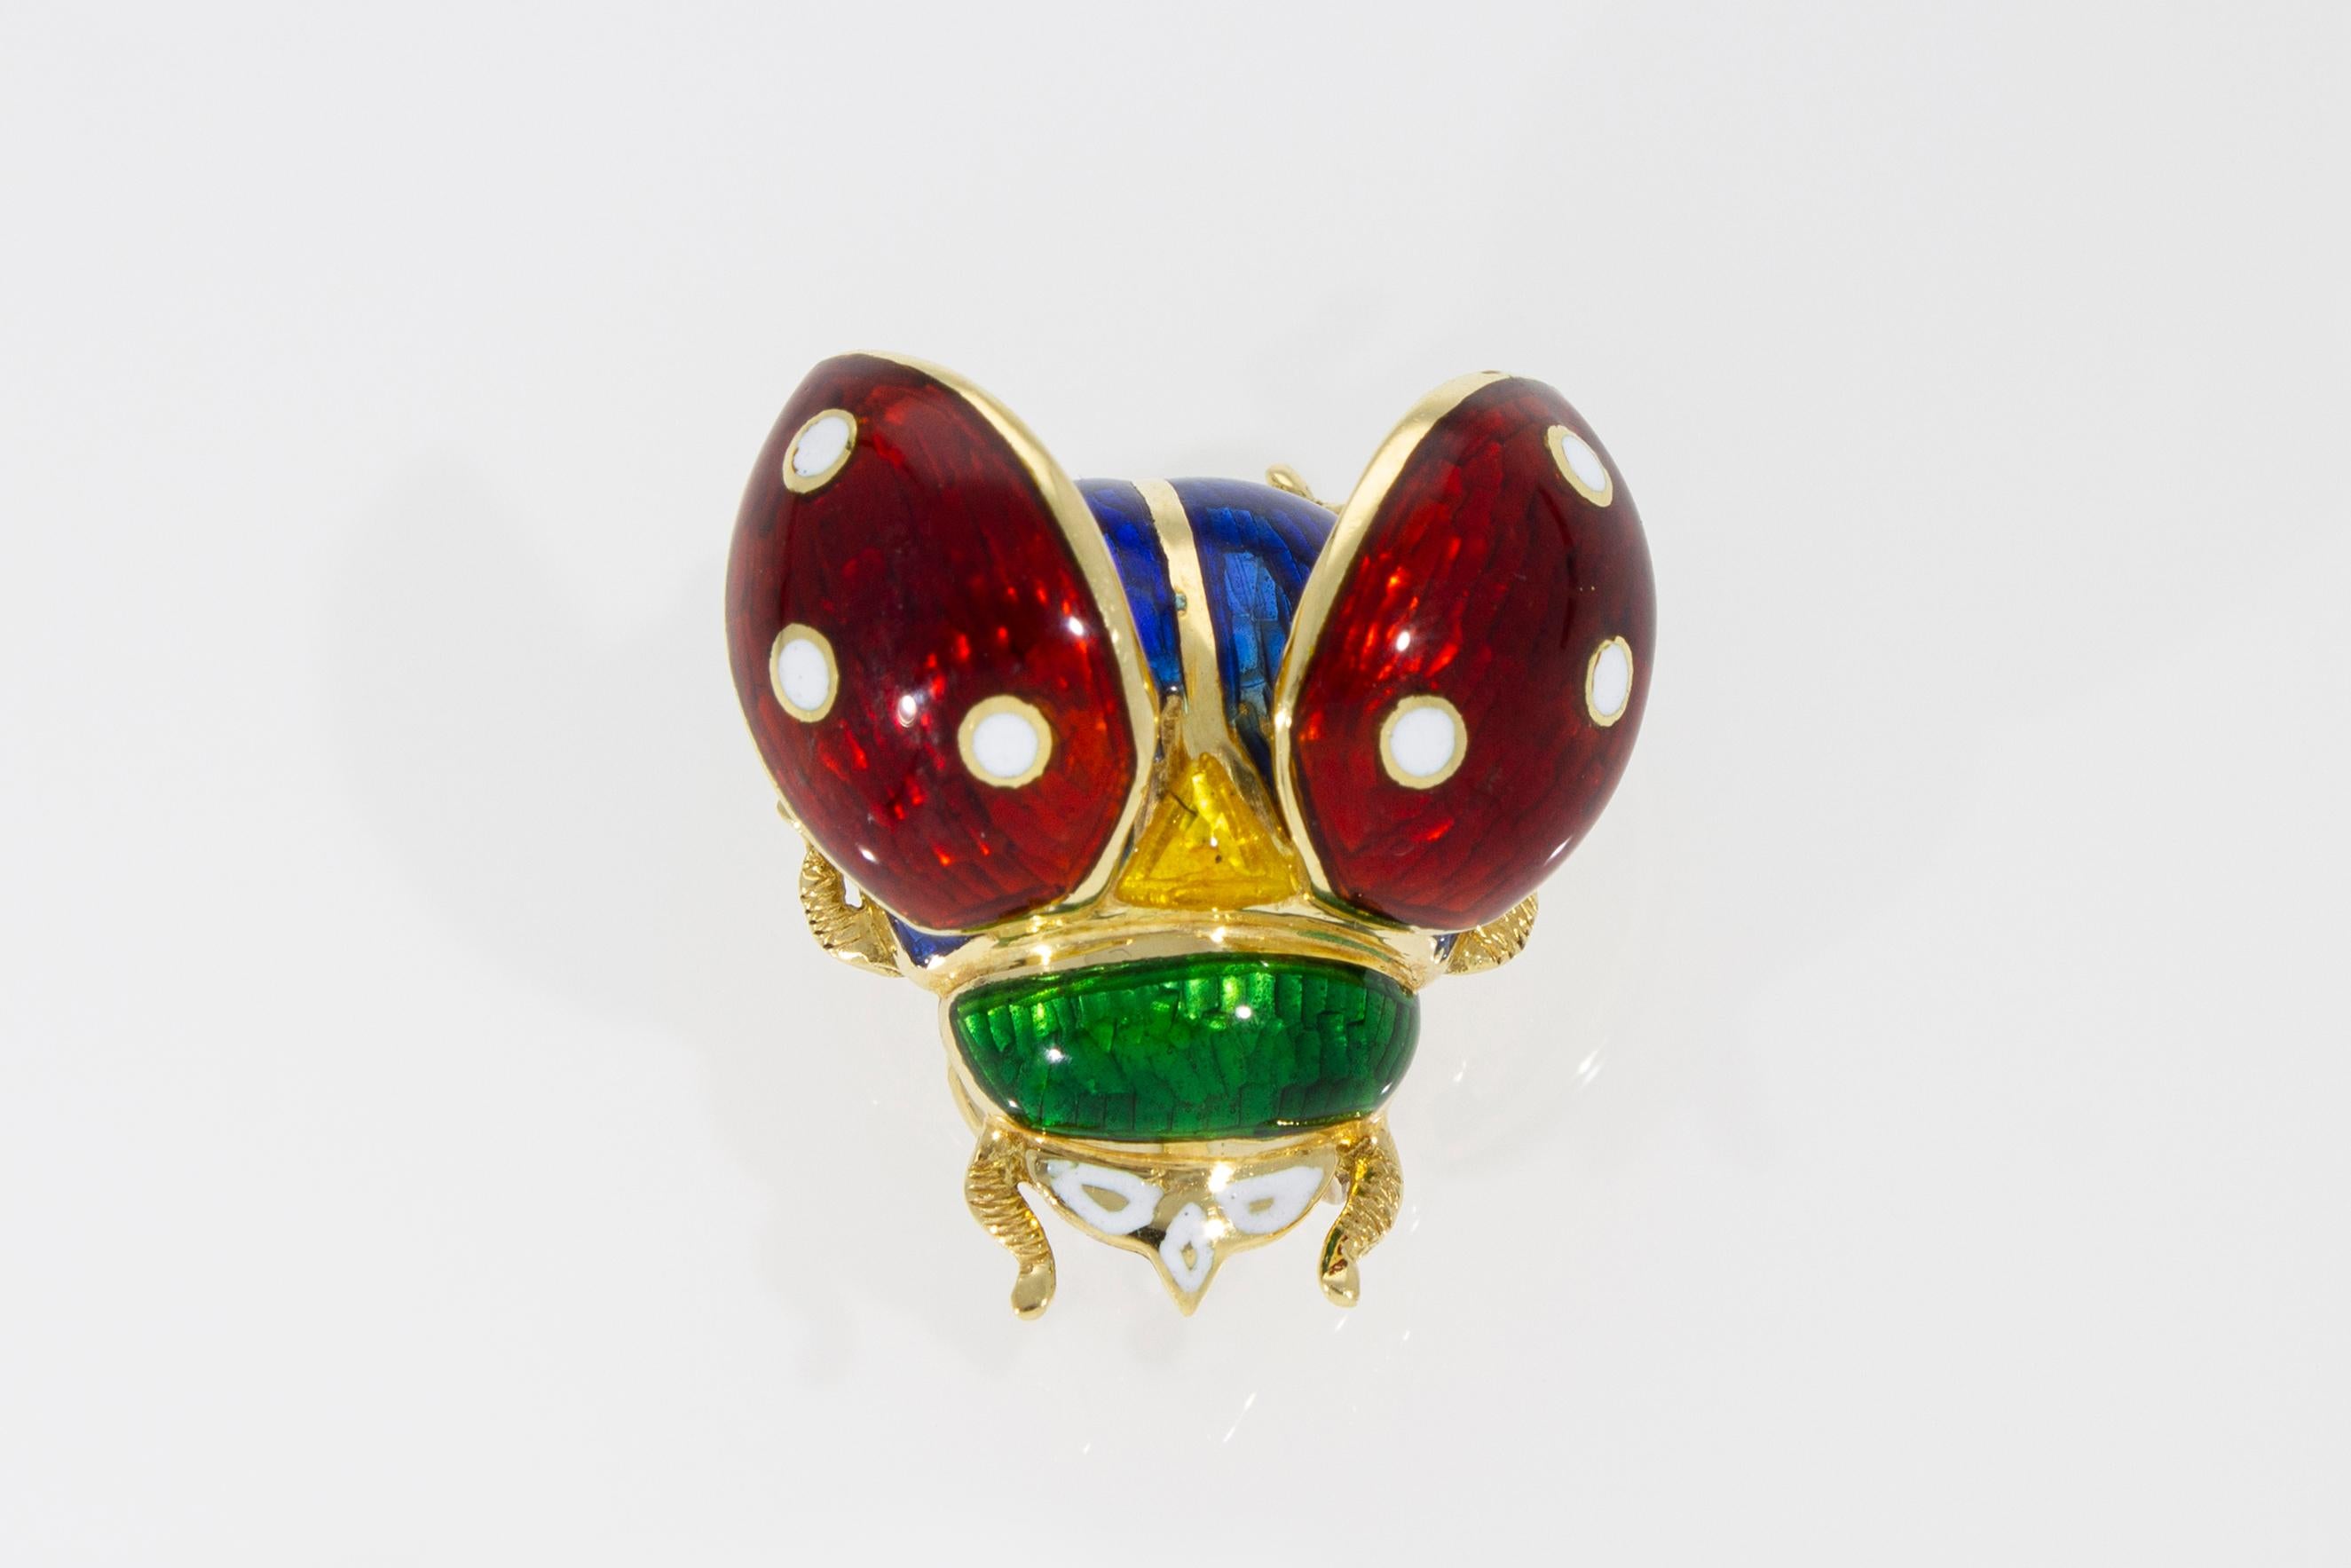 Retro Ladybug-Shaped Pendant and Brooch with Enamel of Various Colors For Sale